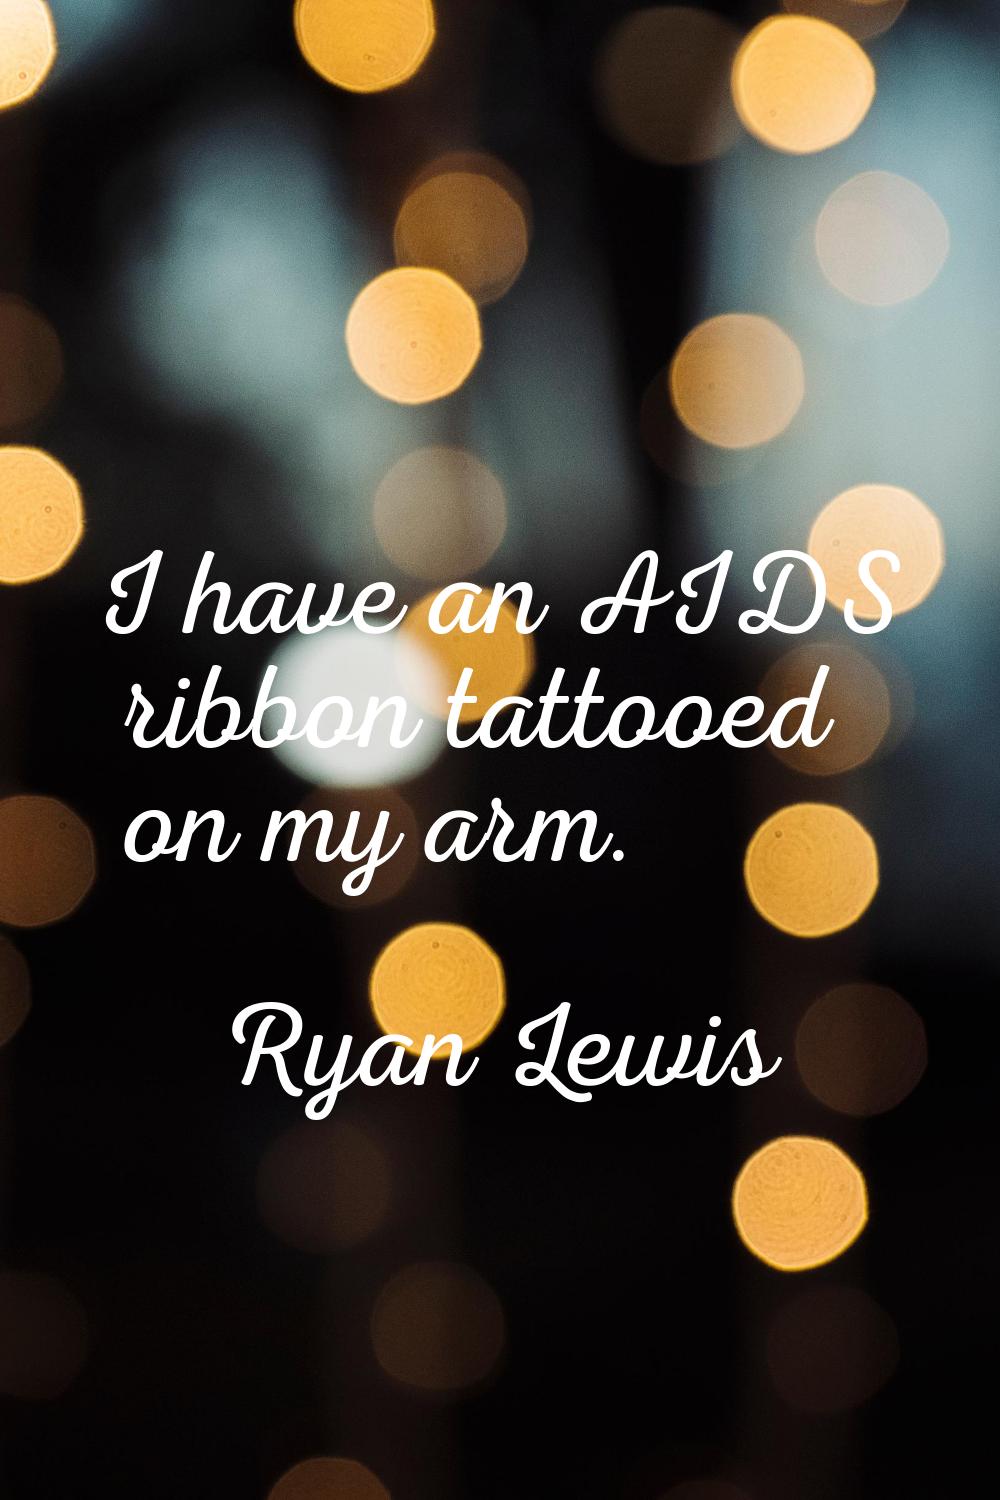 I have an AIDS ribbon tattooed on my arm.